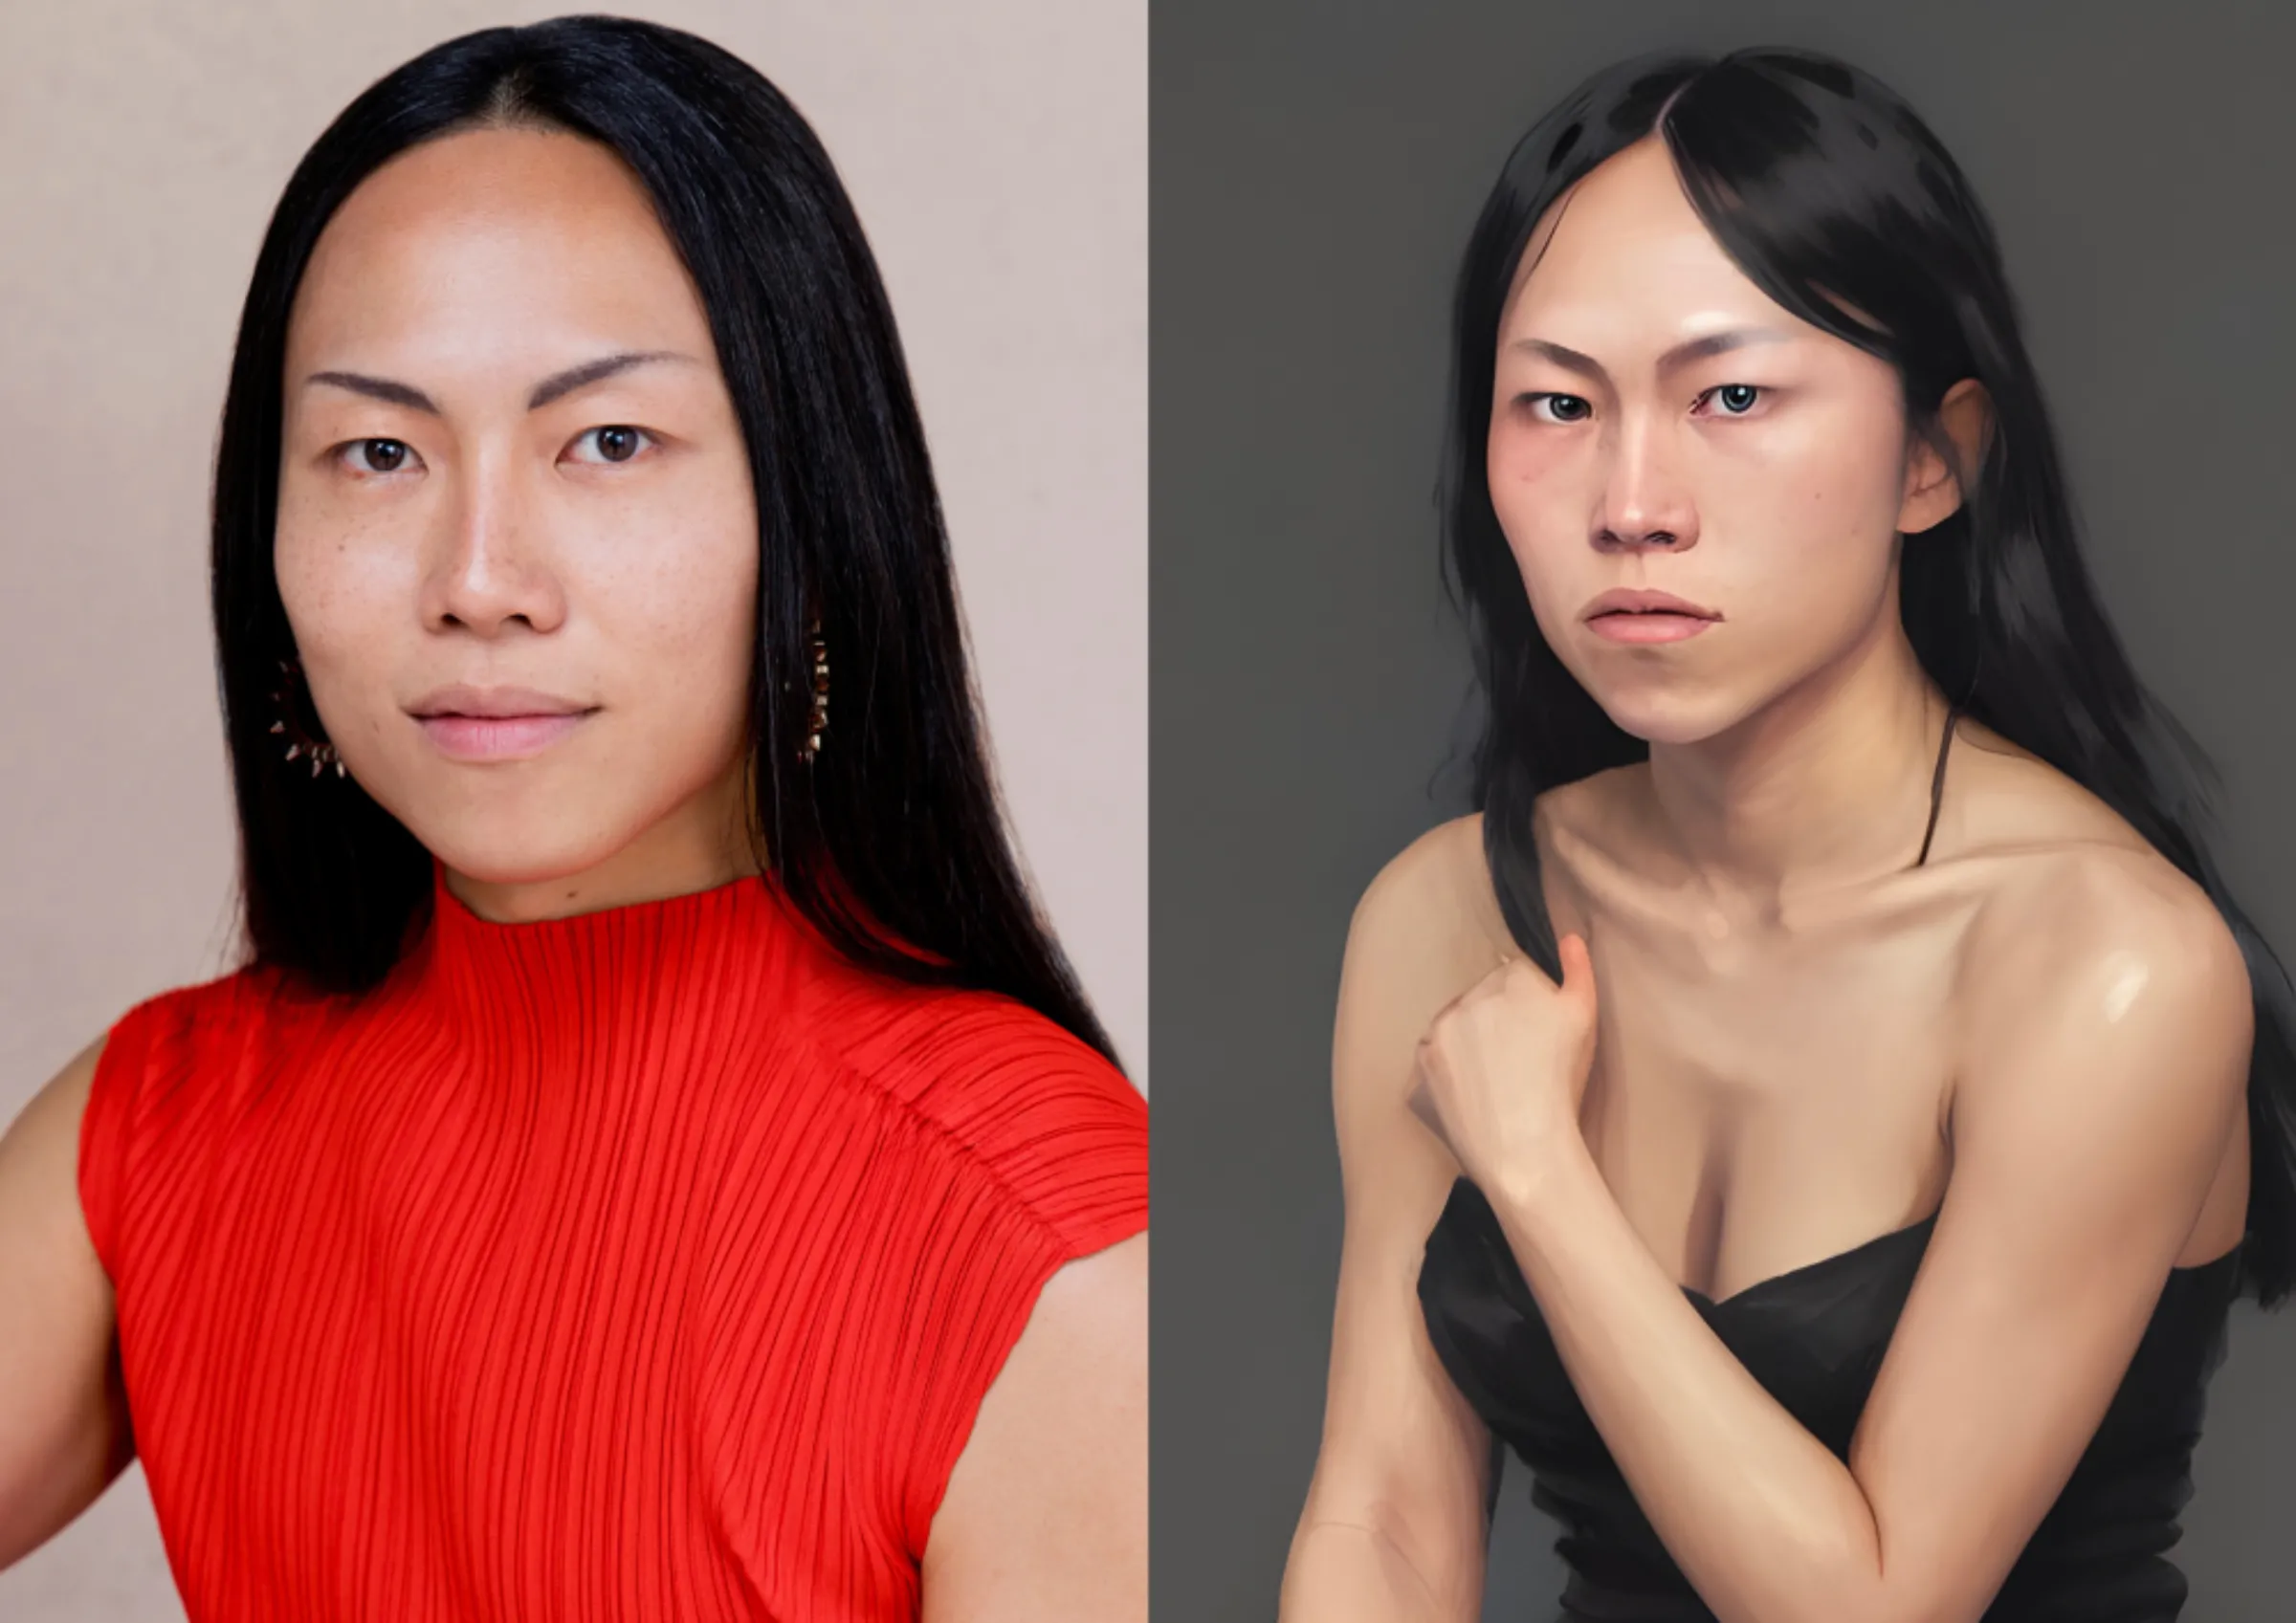 A composite image of Philip Li, also known as Le Fil, a pop artist in London and an edited image of Li created by Lensa, an artificial intelligence-based photo editing tool. Philip Li/Handout via Thomson Reuters Foundation